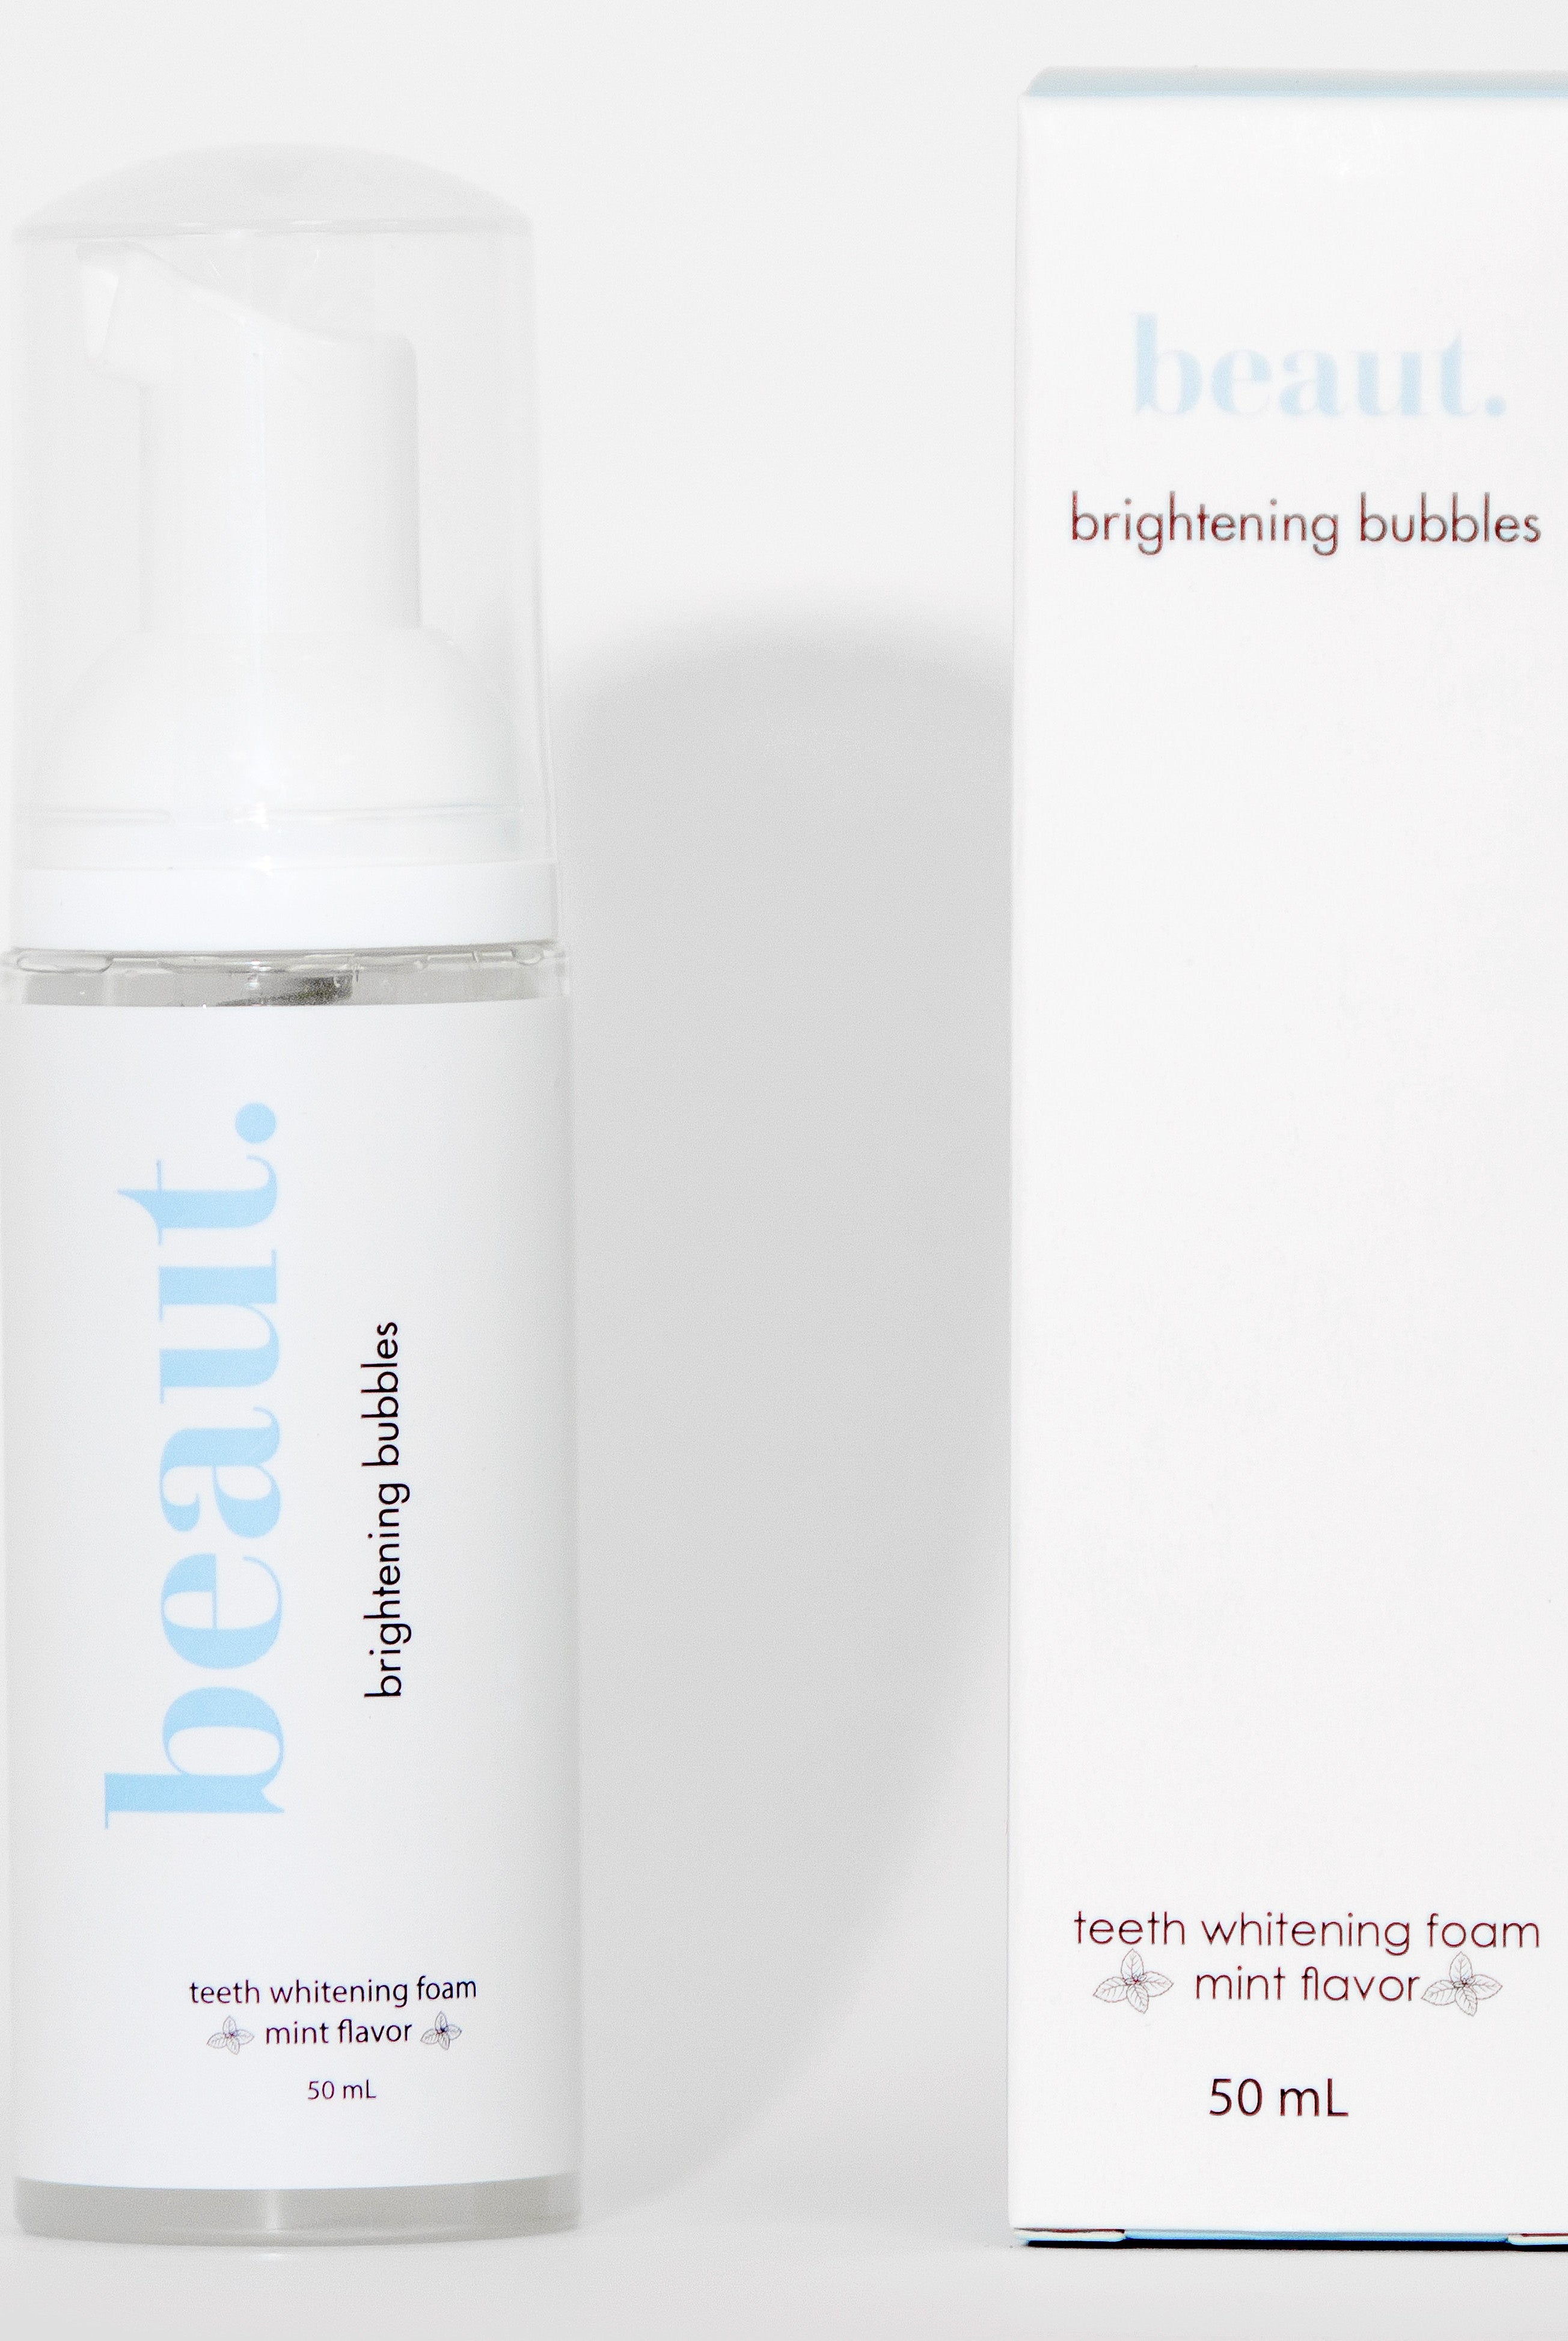 MINT BRIGHTENING BUBBLES-Bath & Body-beaut.beautyco.-The Lovely Closet, Women's Fashion Boutique in Alexandria, KY